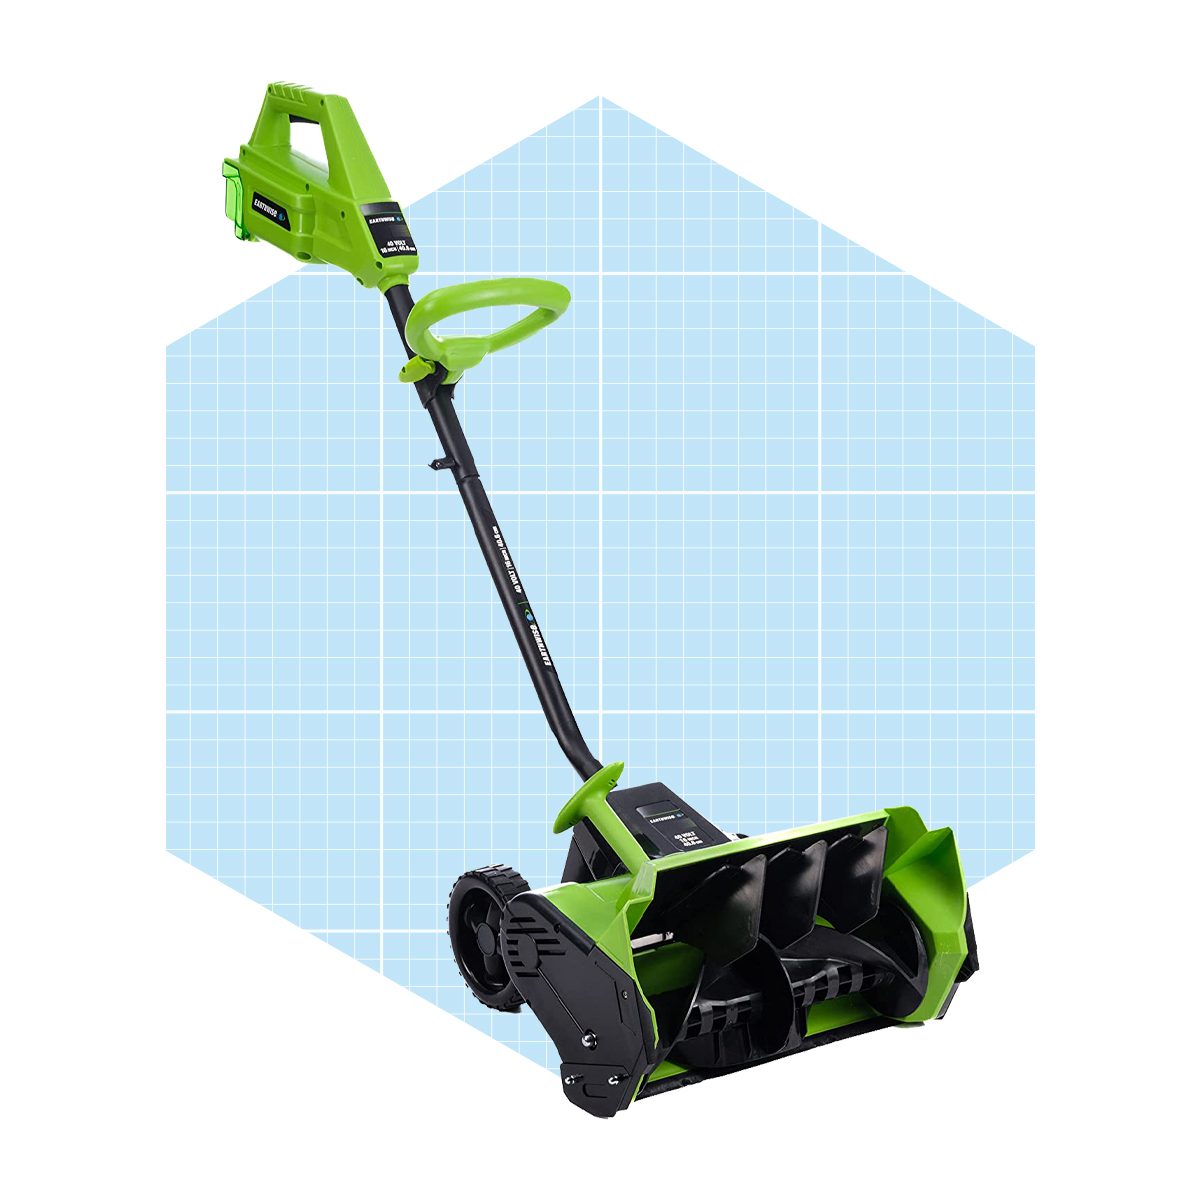 ⚡ Modern Snow Removal Tools & Snow Blower Machines for Home